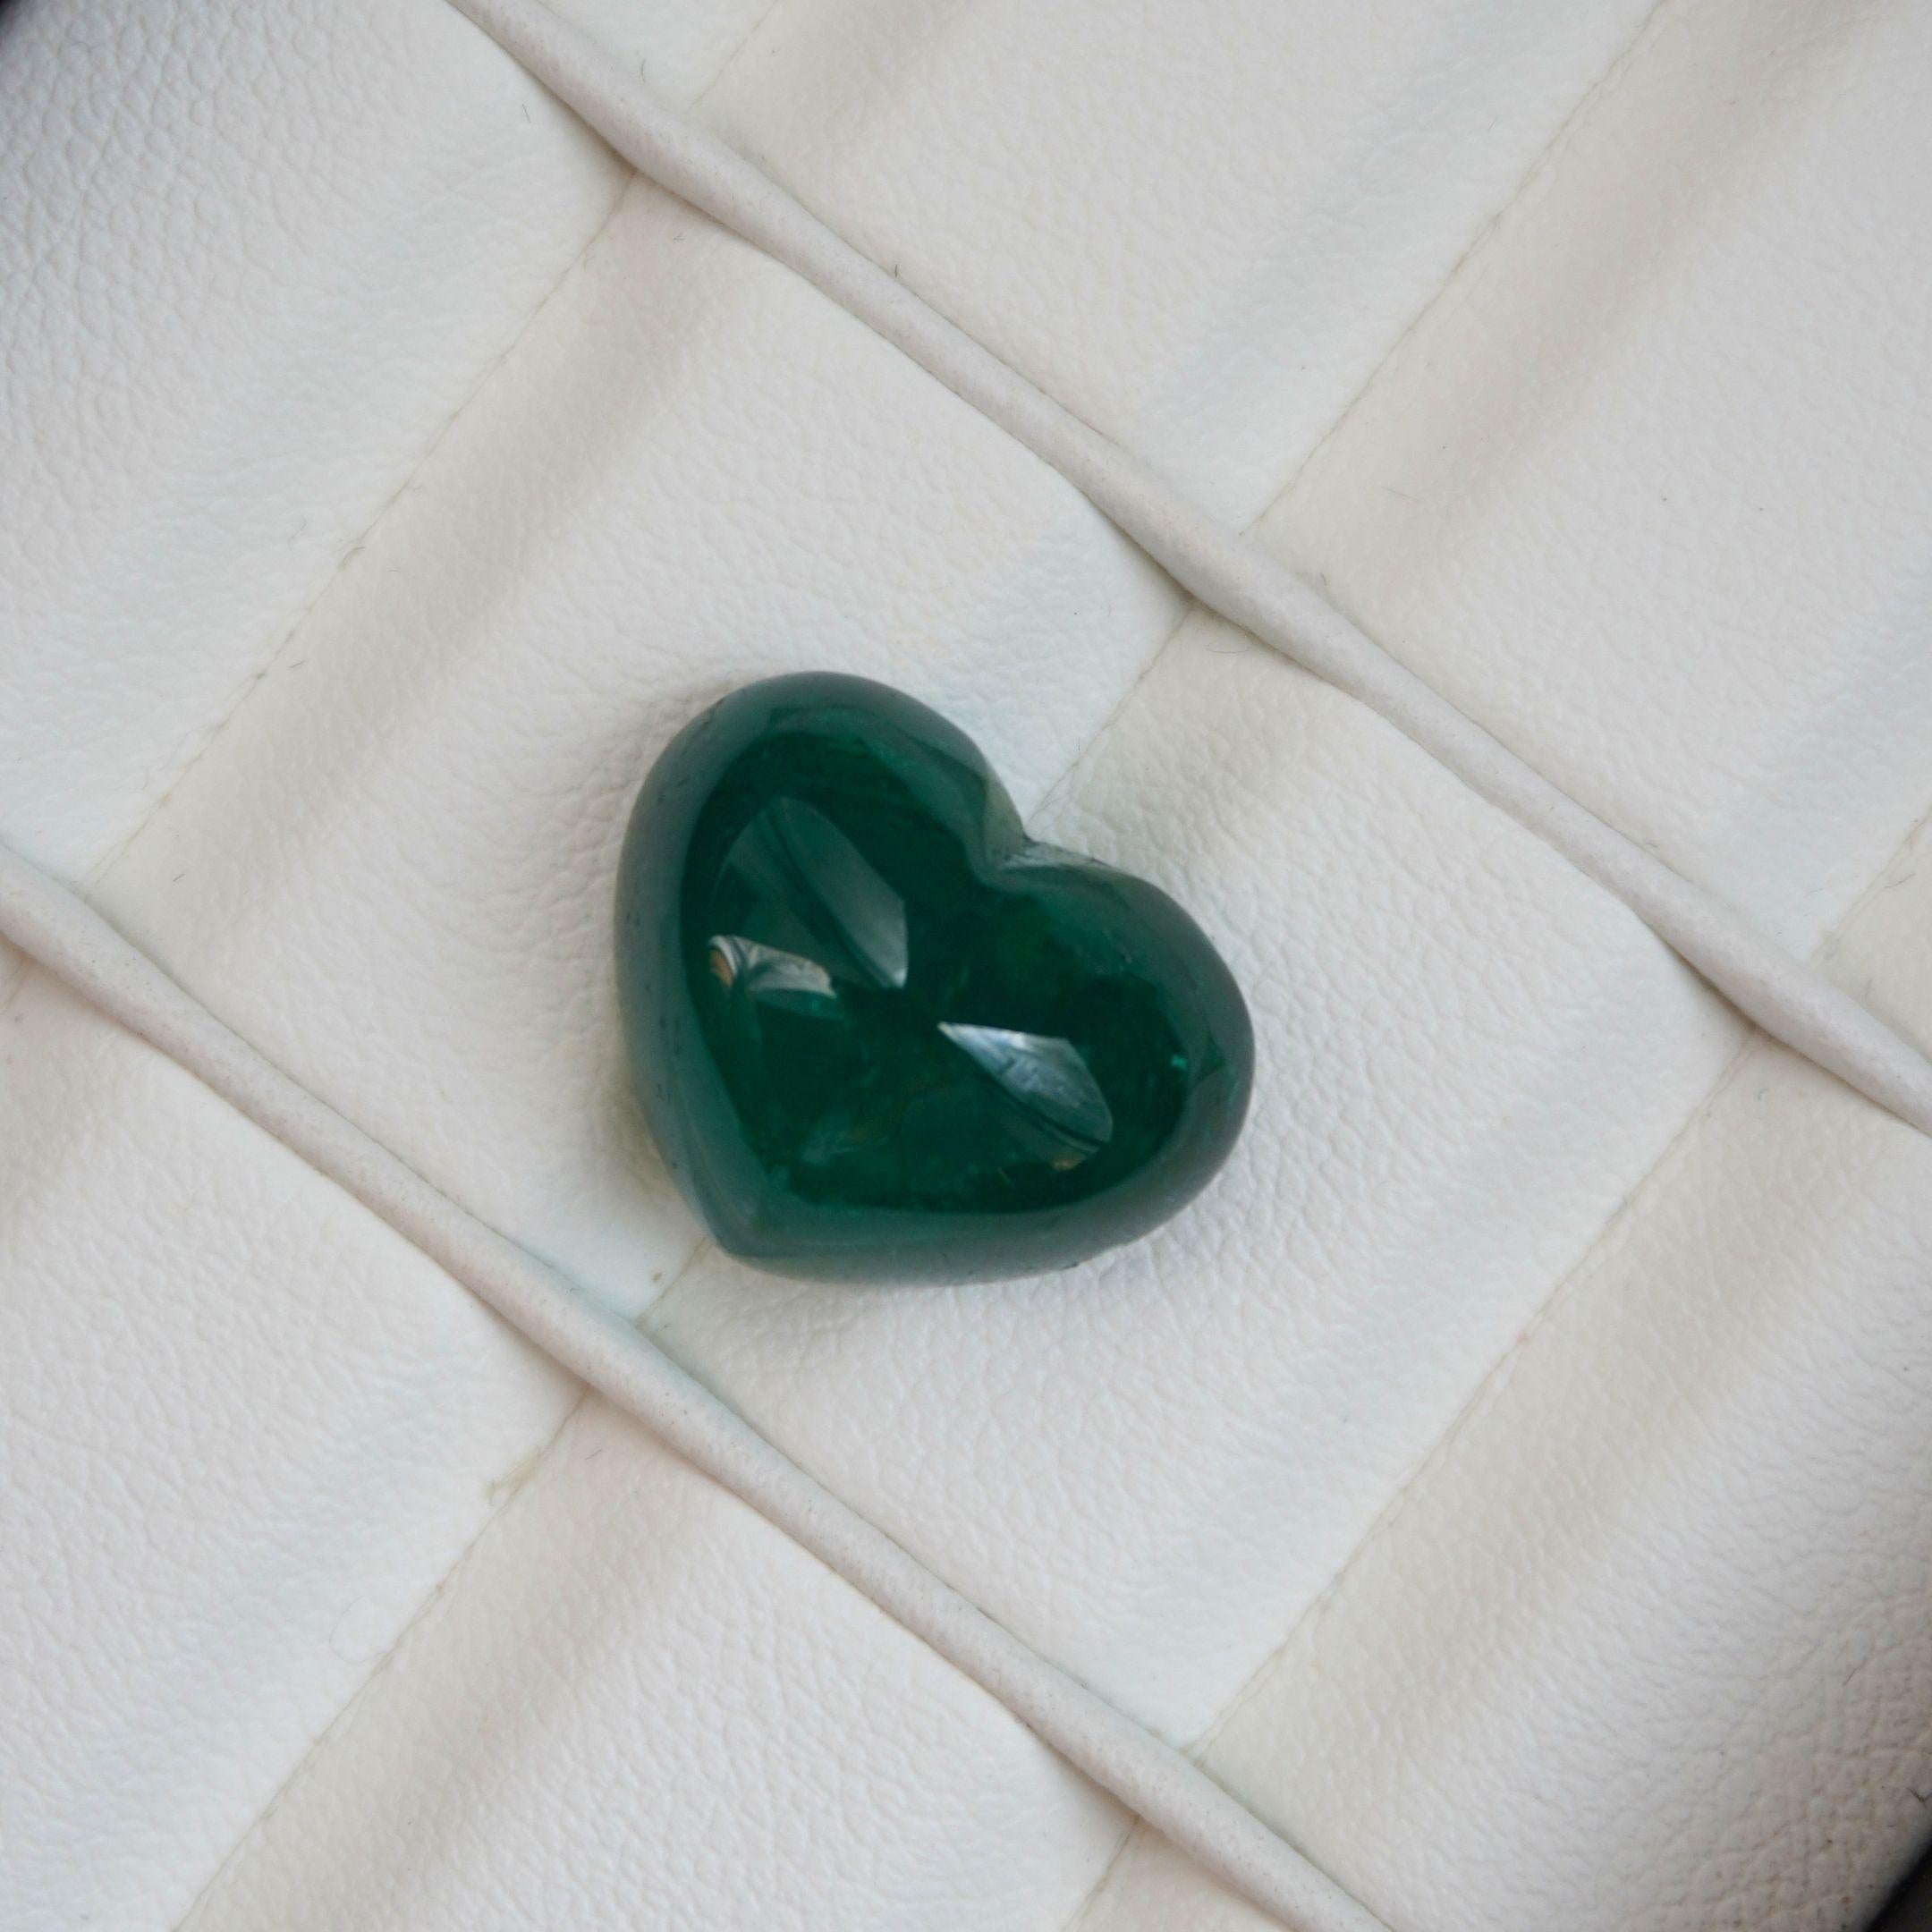 DETAILS
Emerald Weight: 10.20 CT
Measurements: 15.2 x 12.2 x 9 mm
Shape: Heart Cabochon
Color: Green
Hardness: 7.5 - 8
Birthstone: May
Natural

EMERALD BIRTHSTONE
The May birthstone, Emerald, was dedicated to Venus, the goddess of love and beauty.